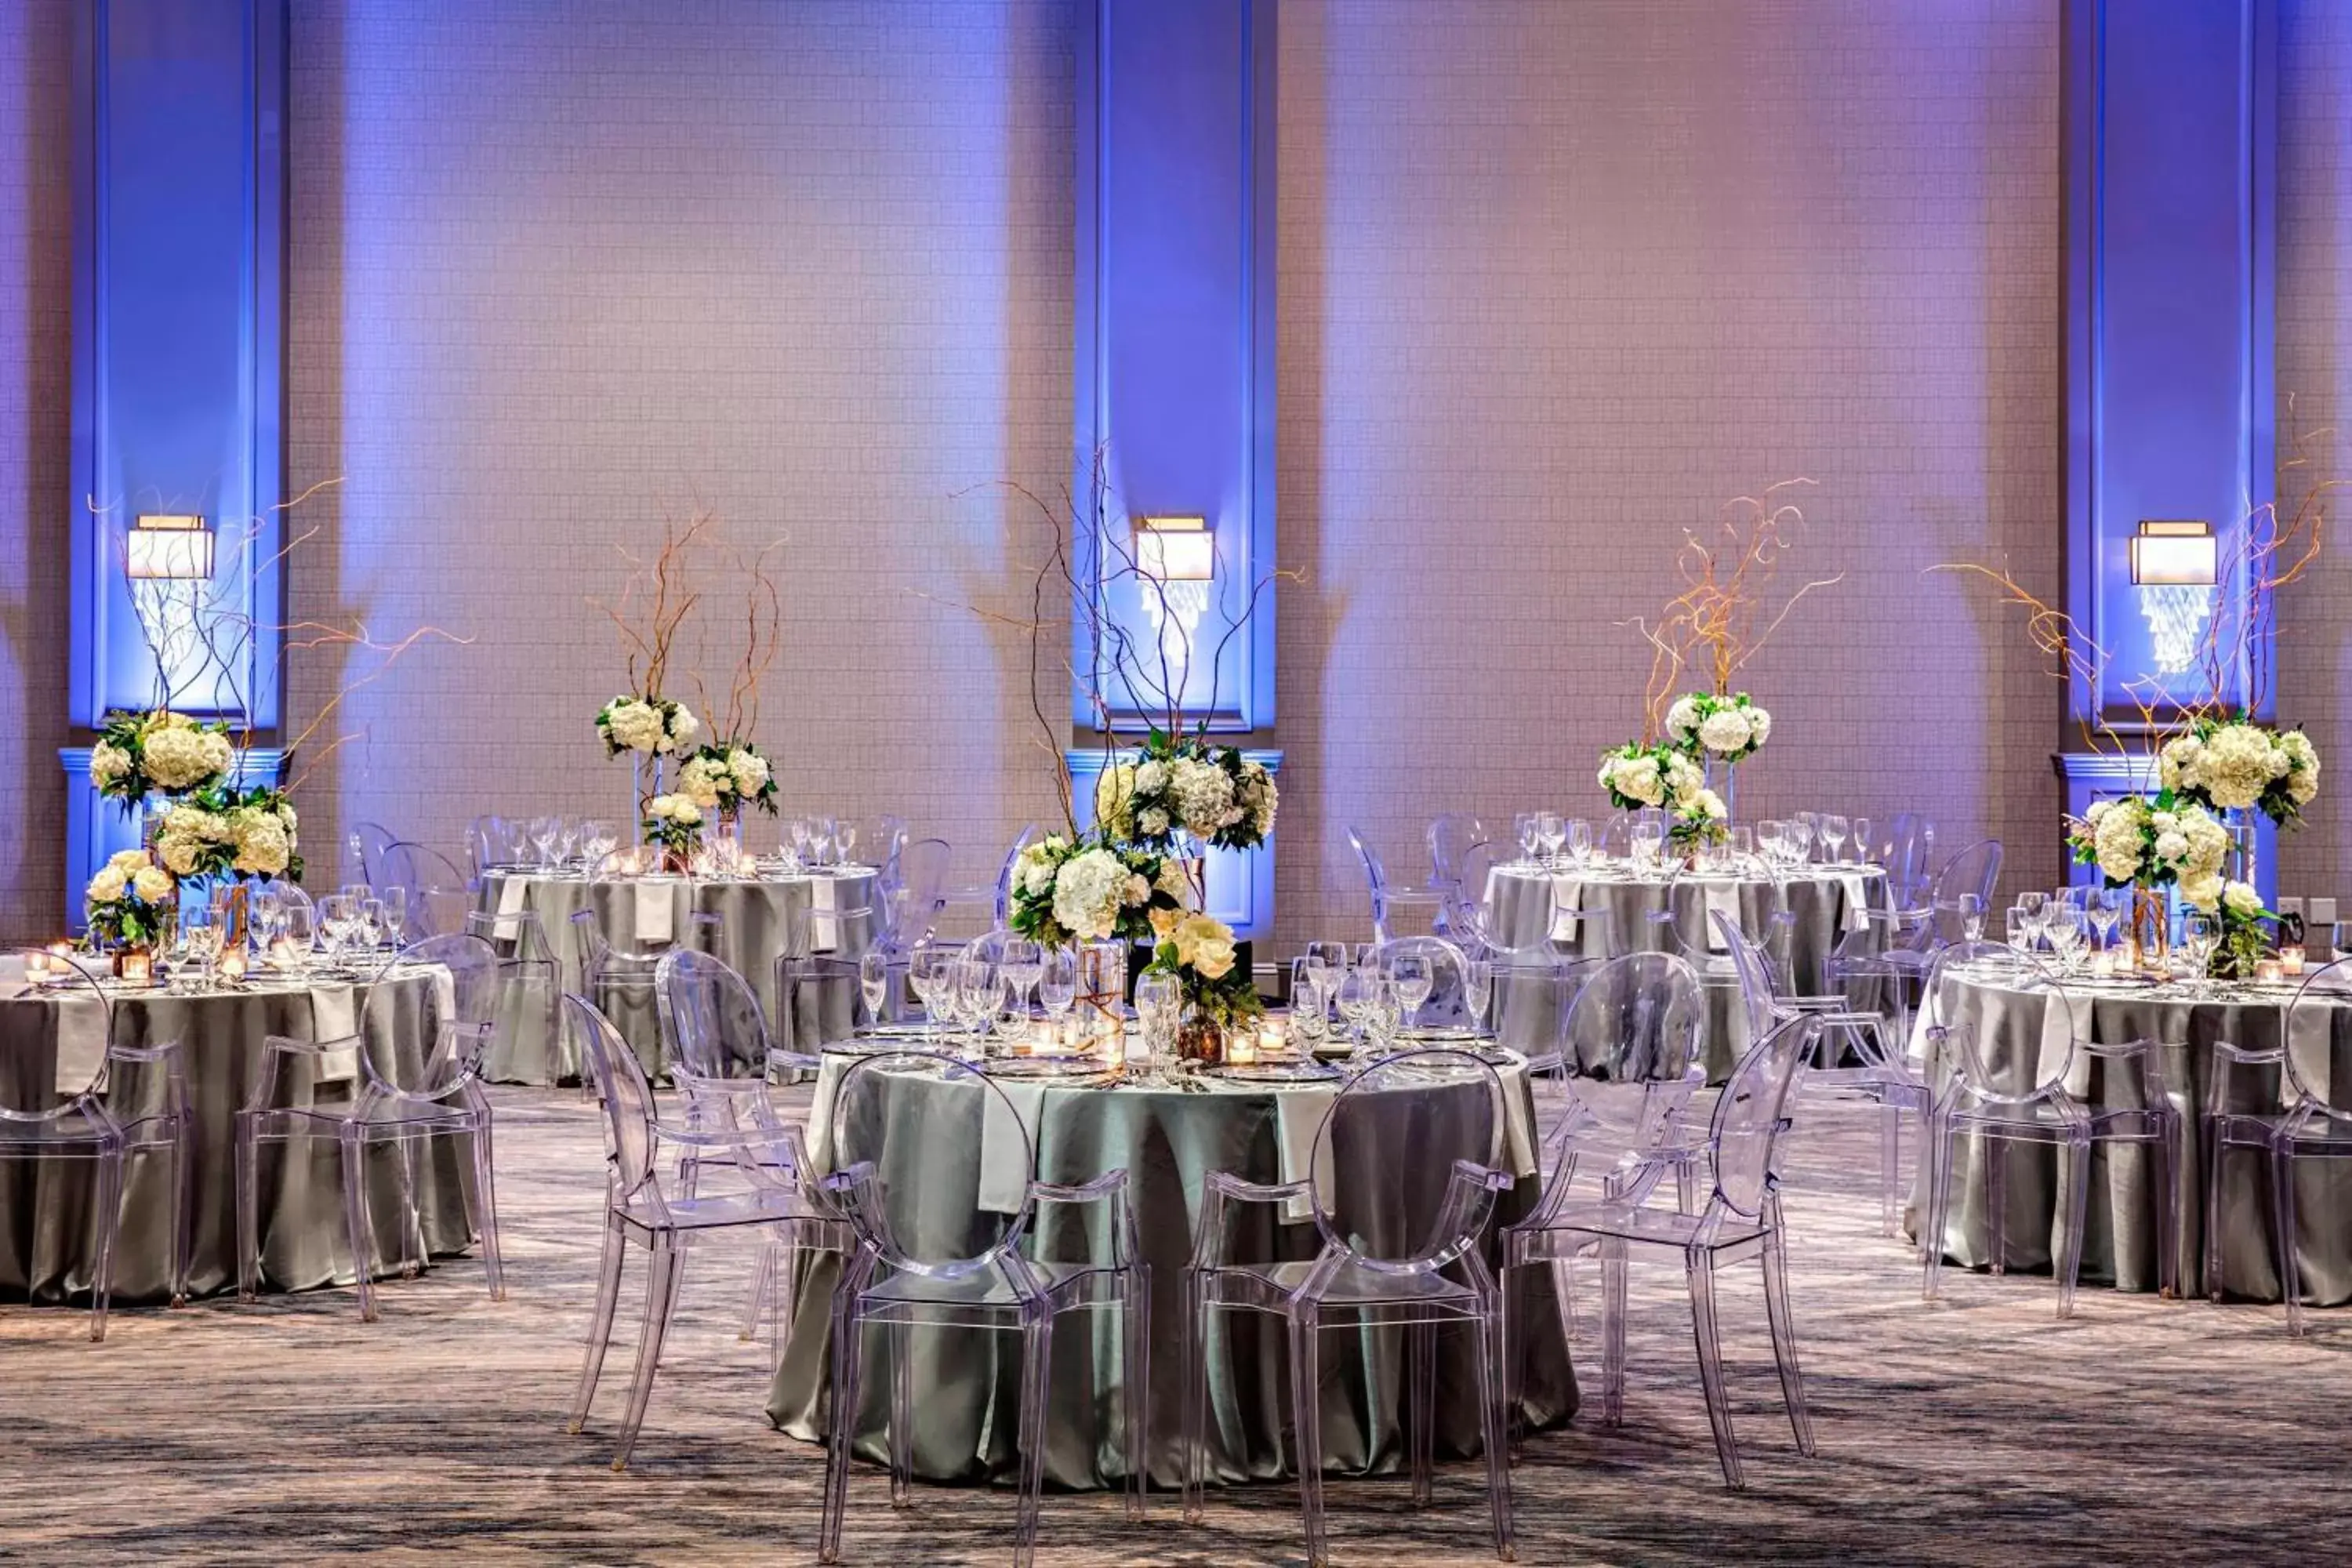 Banquet/Function facilities, Banquet Facilities in JW Marriott Houston by the Galleria